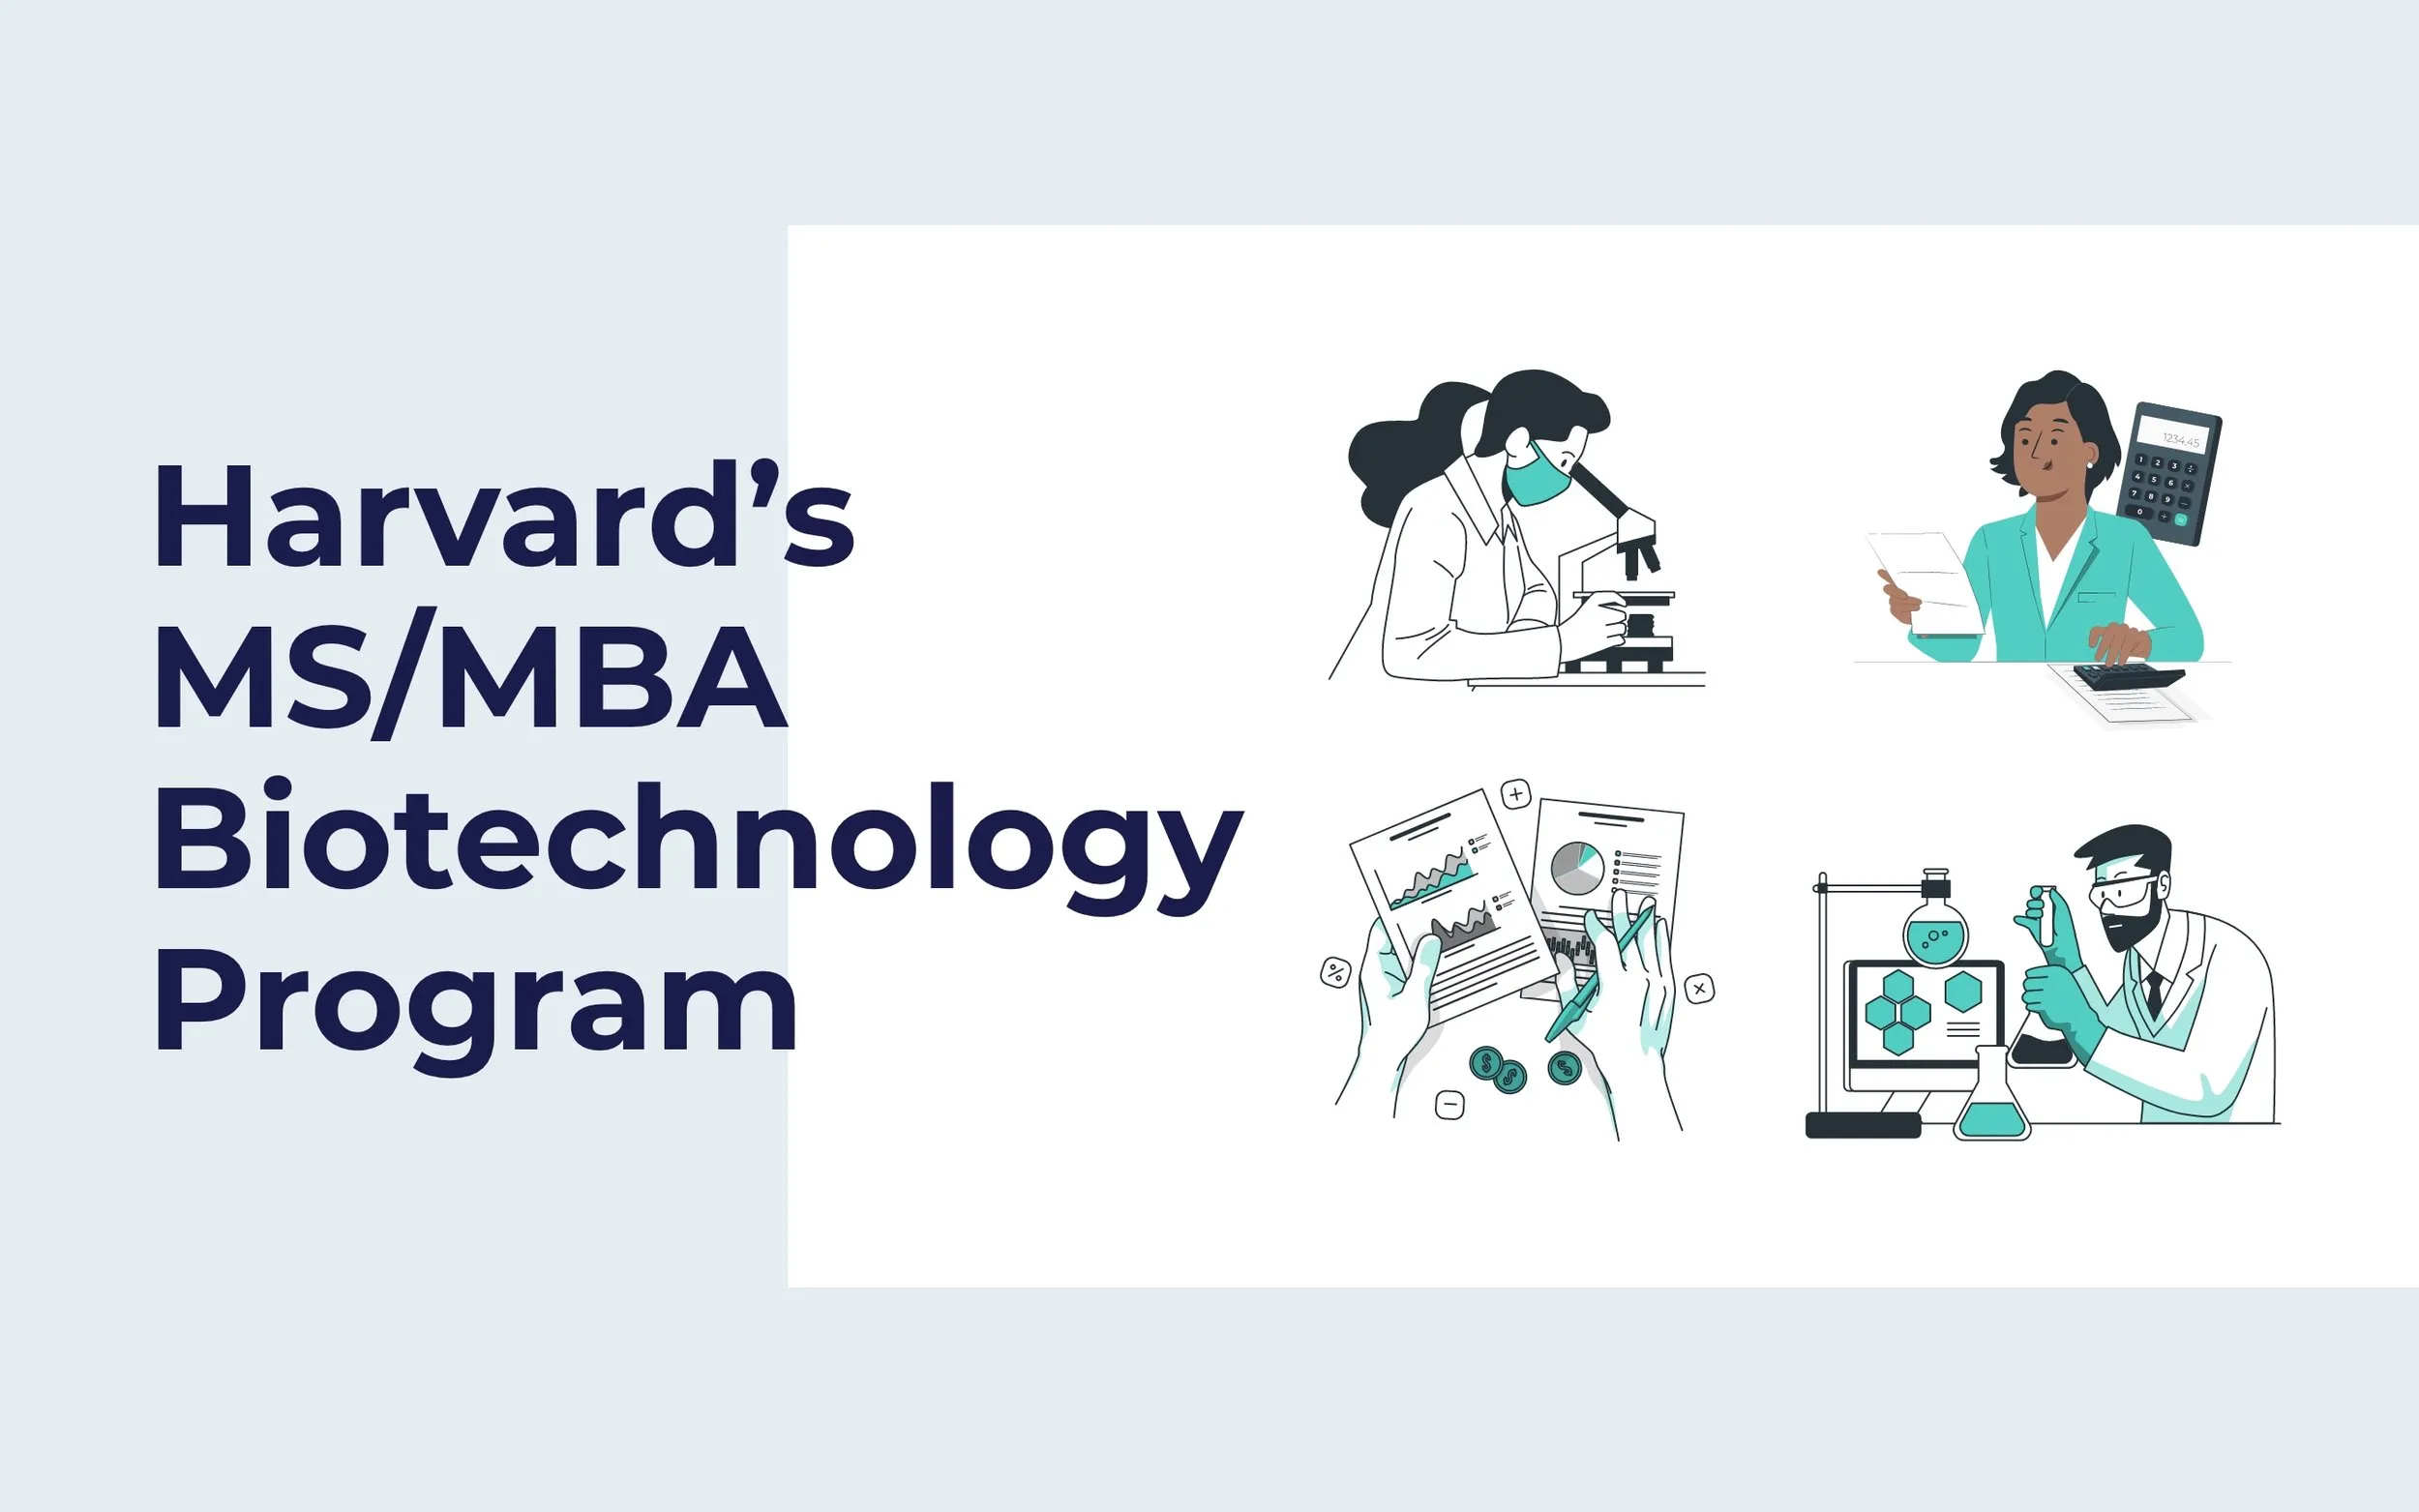 All you need to know about Harvard’s MS/MBA Biotechnology program